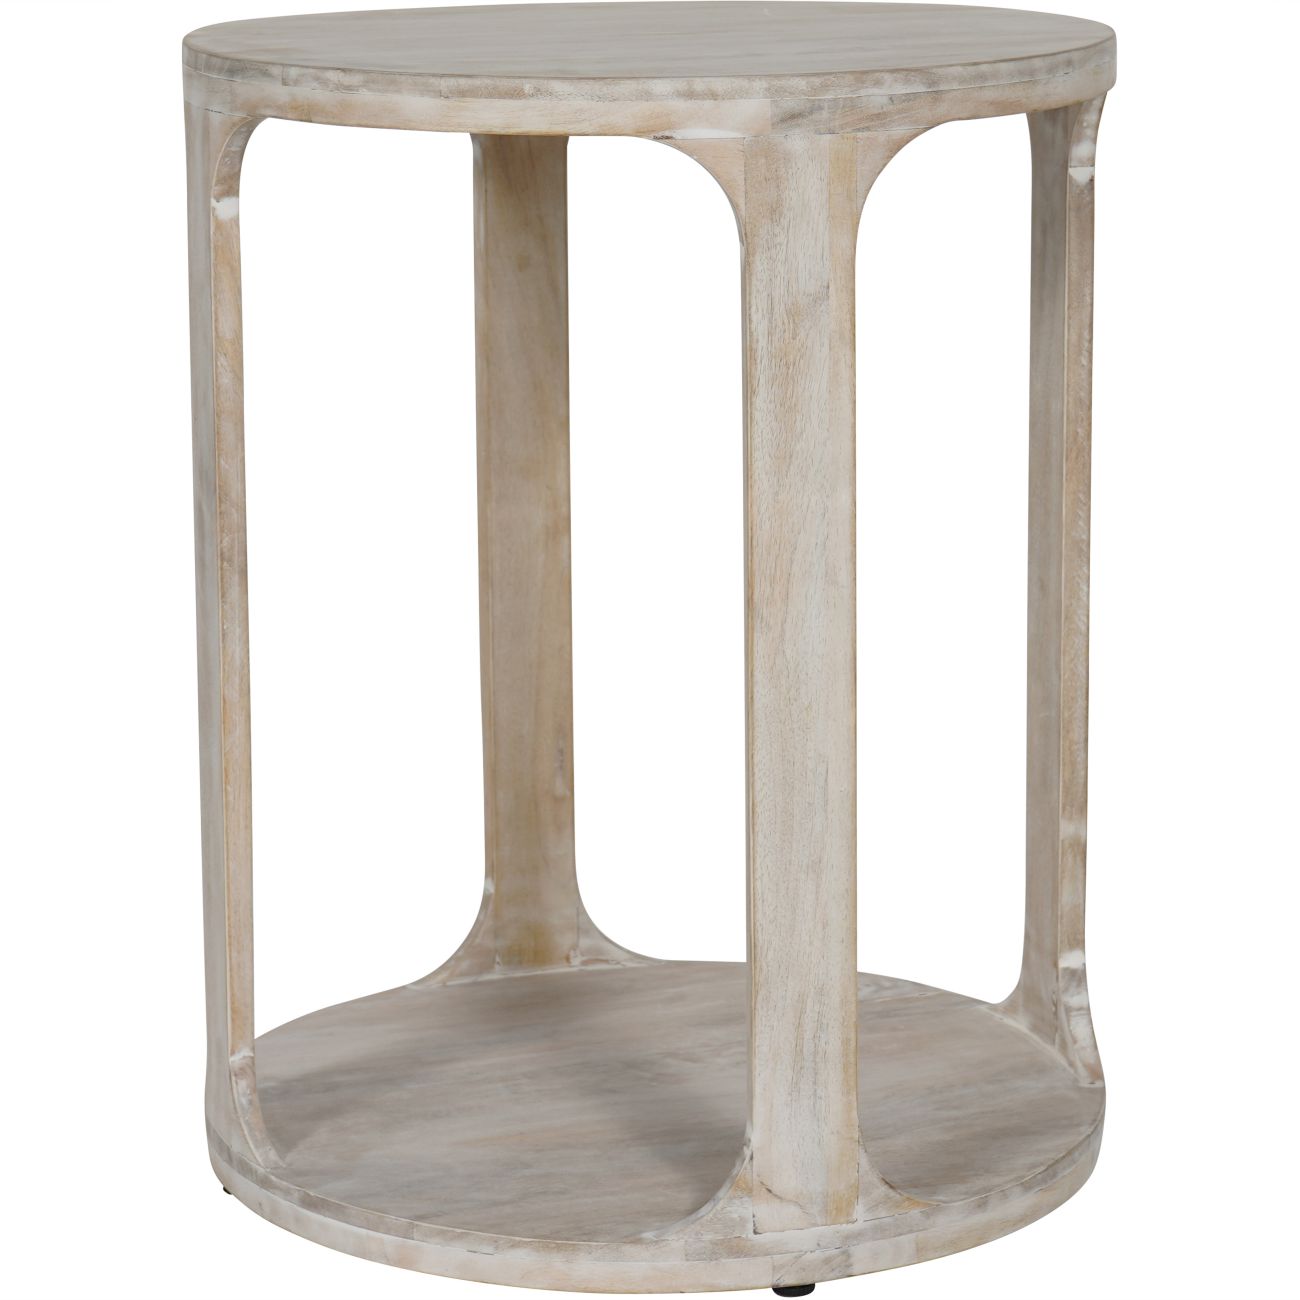 Beadnell Solid Carved Wooden Side Table in Whitewash Finish